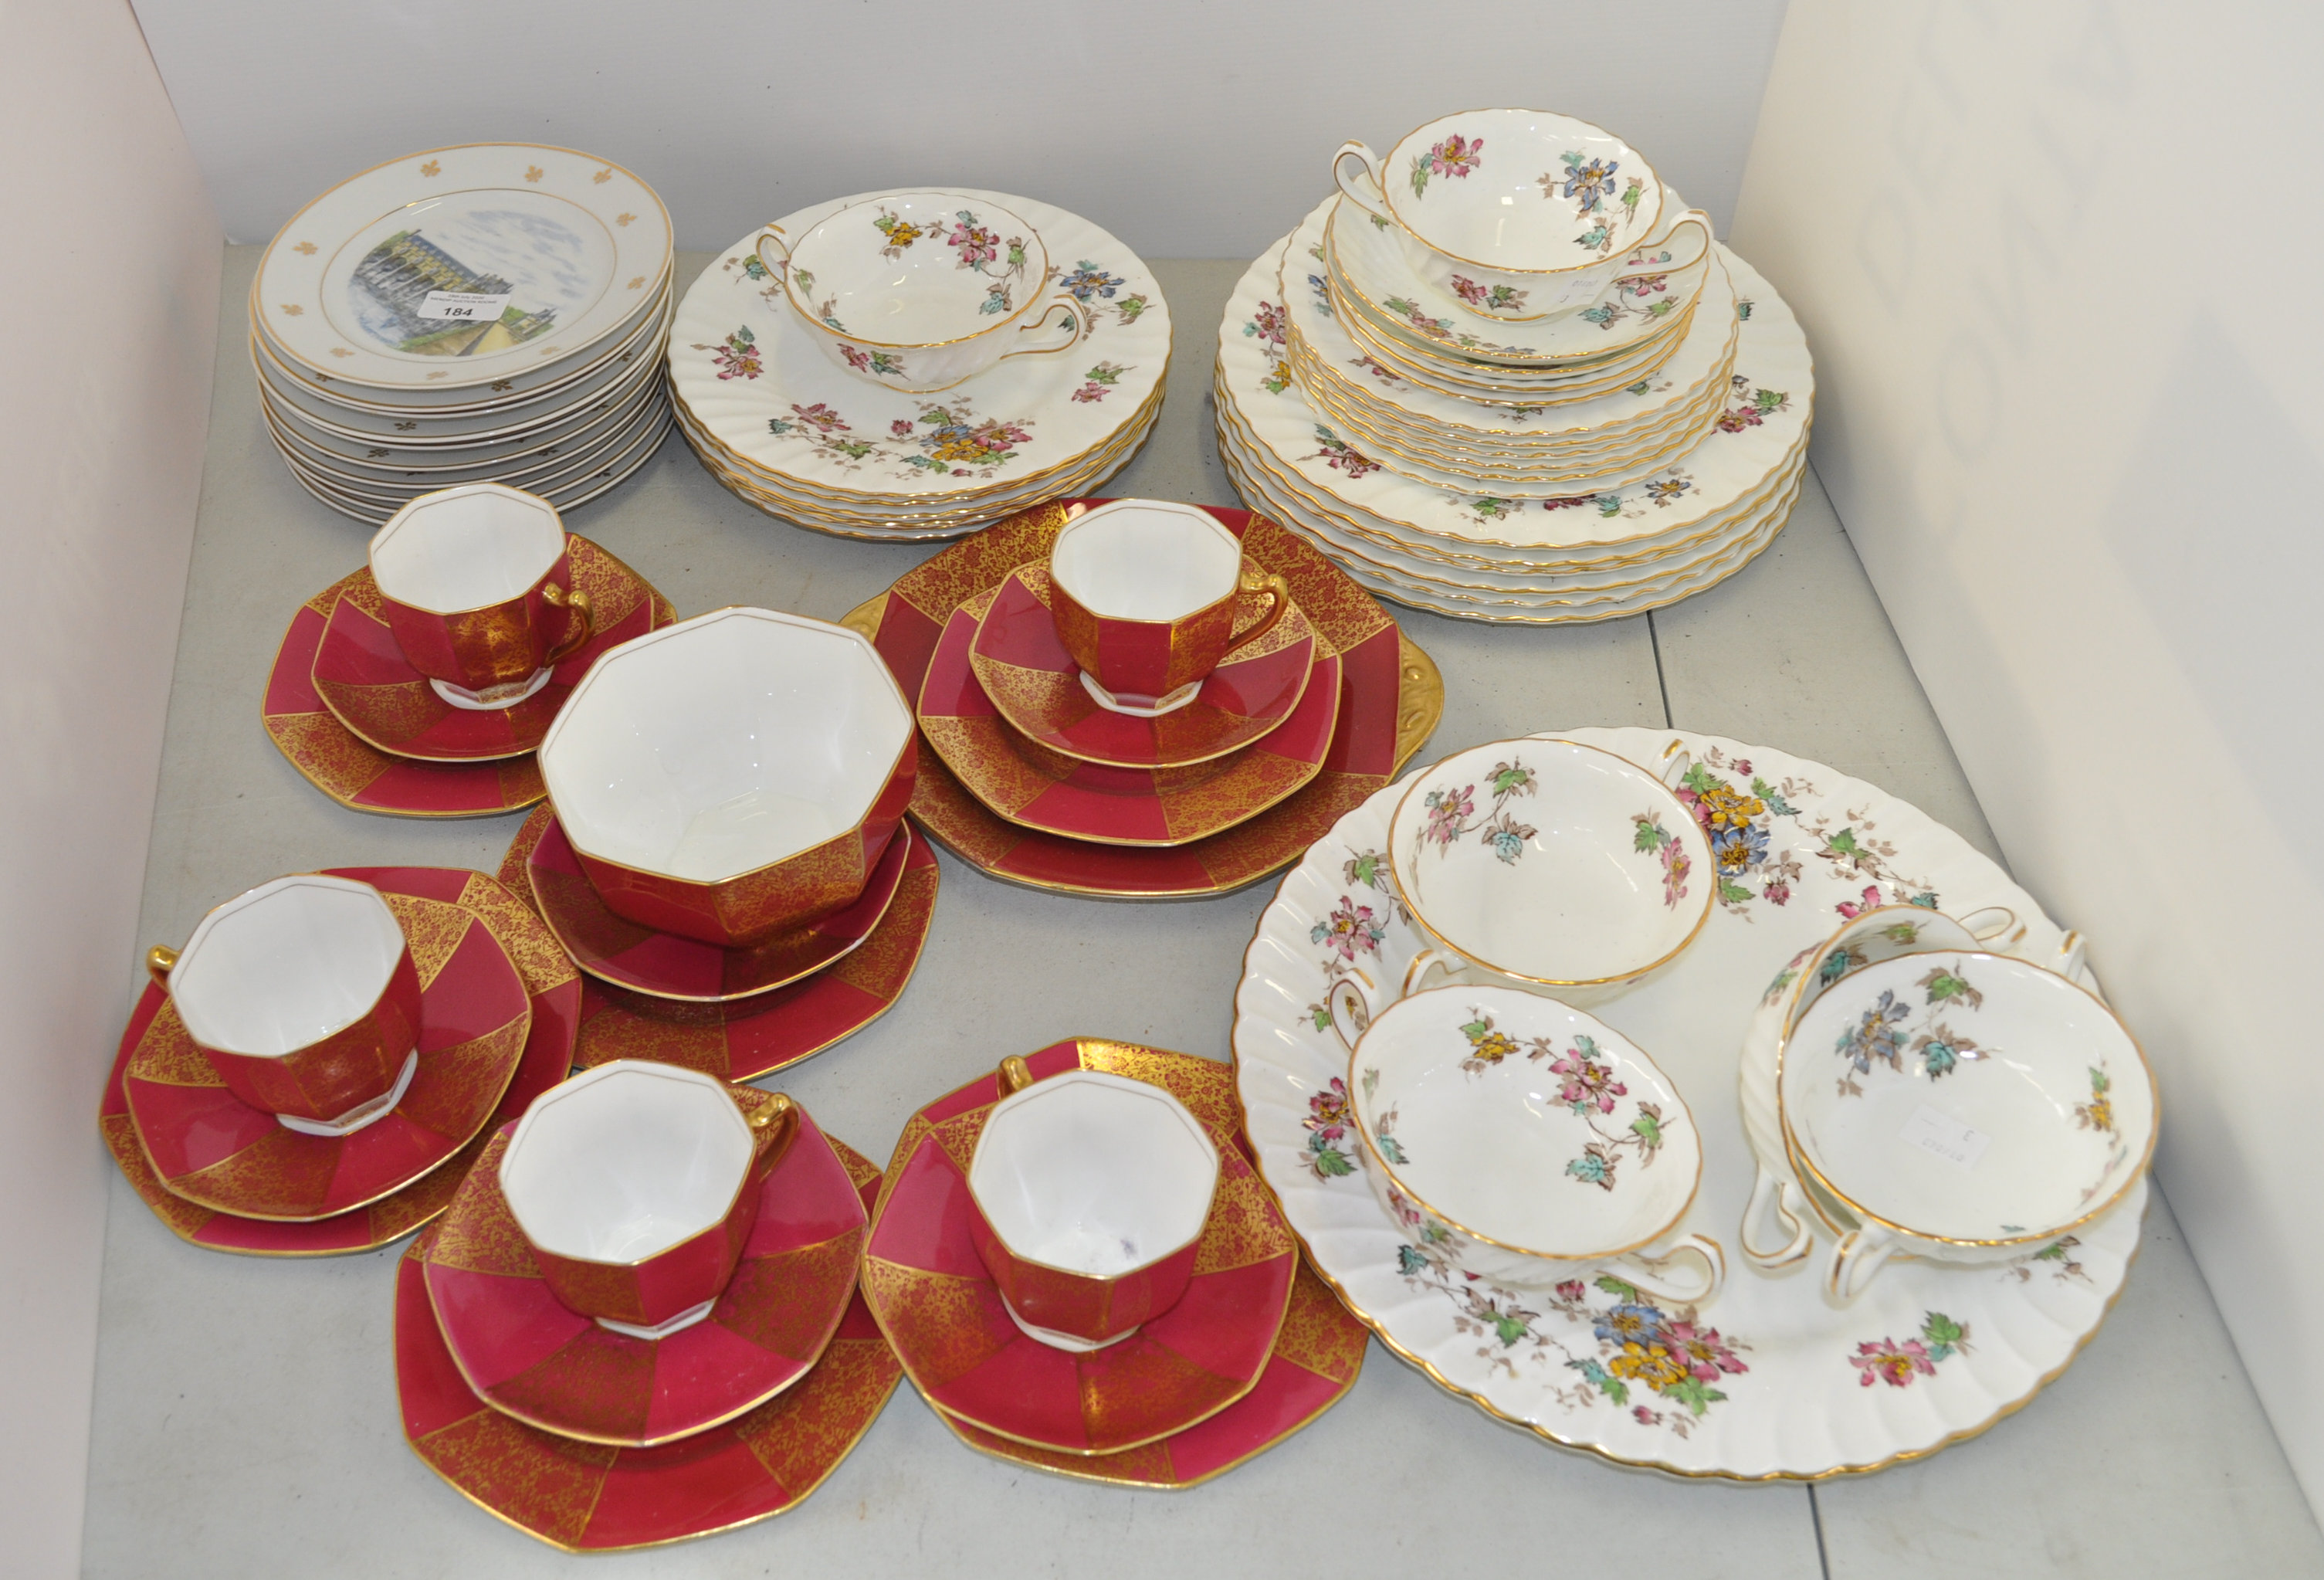 A 'Vermont' dinner service and other items